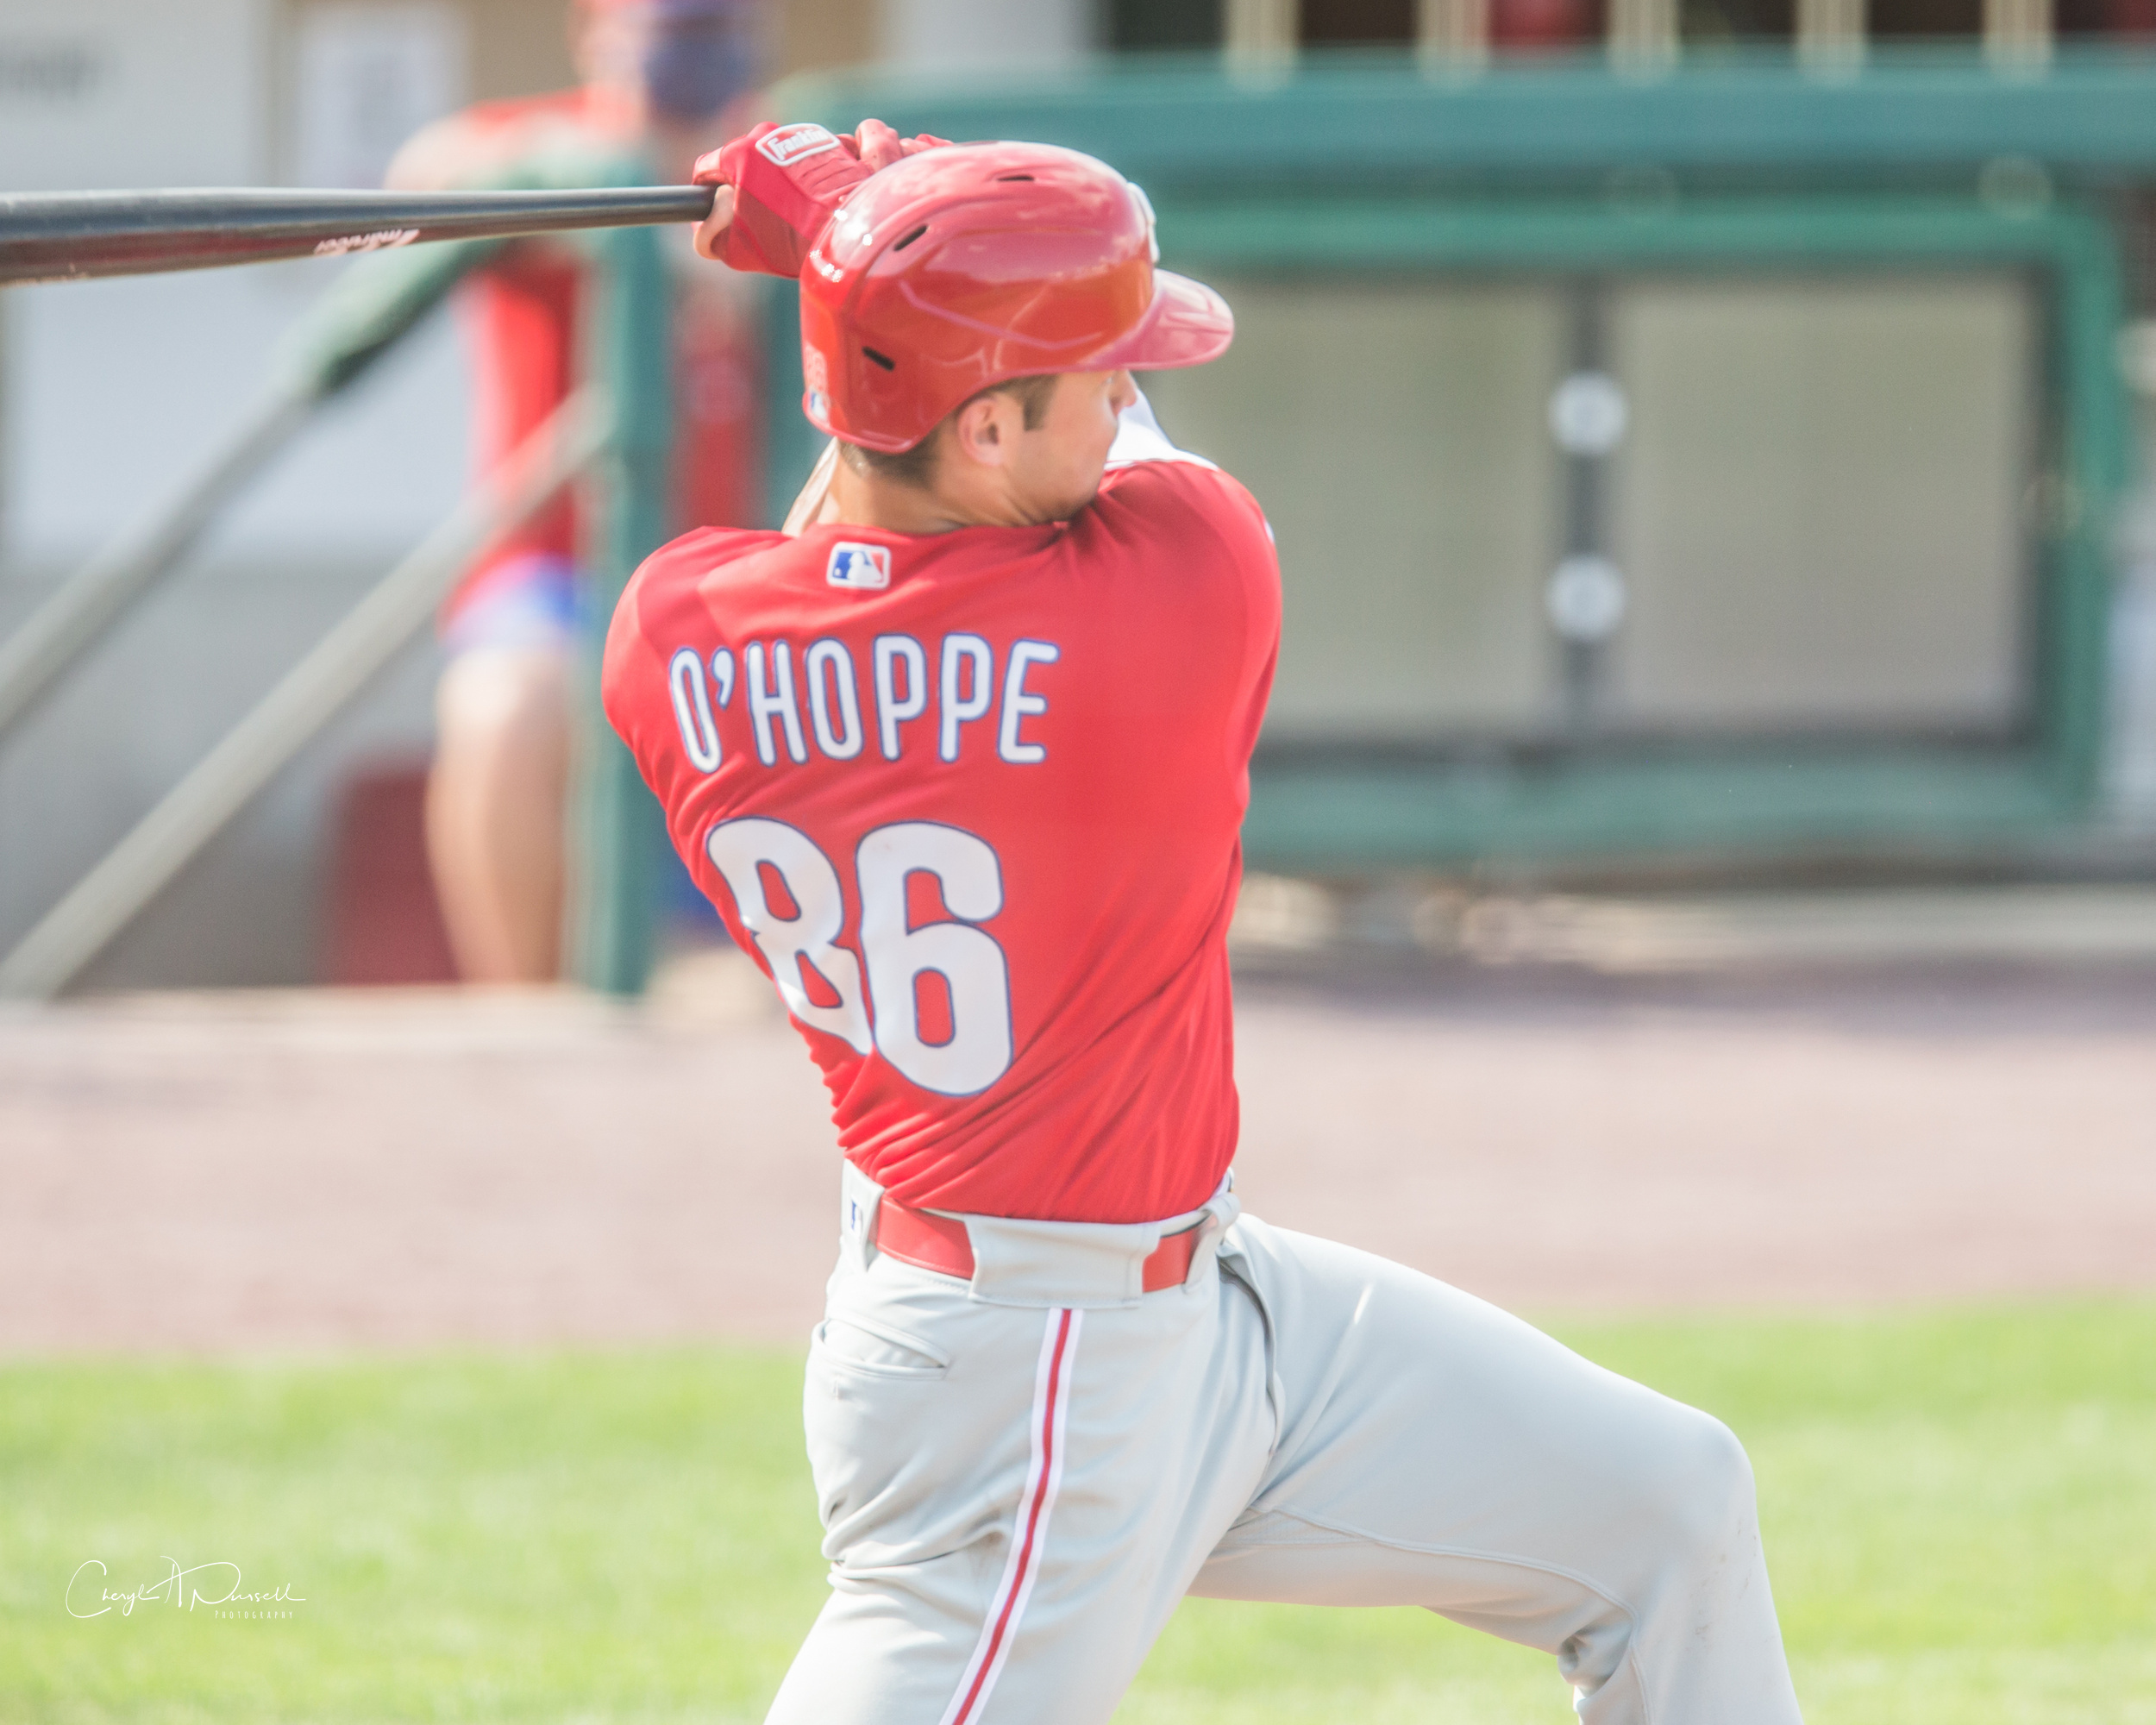 Minor-league week in review: Catcher Logan O'Hoppe clubs walk-off homer   Phillies Nation - Your source for Philadelphia Phillies news, opinion,  history, rumors, events, and other fun stuff.